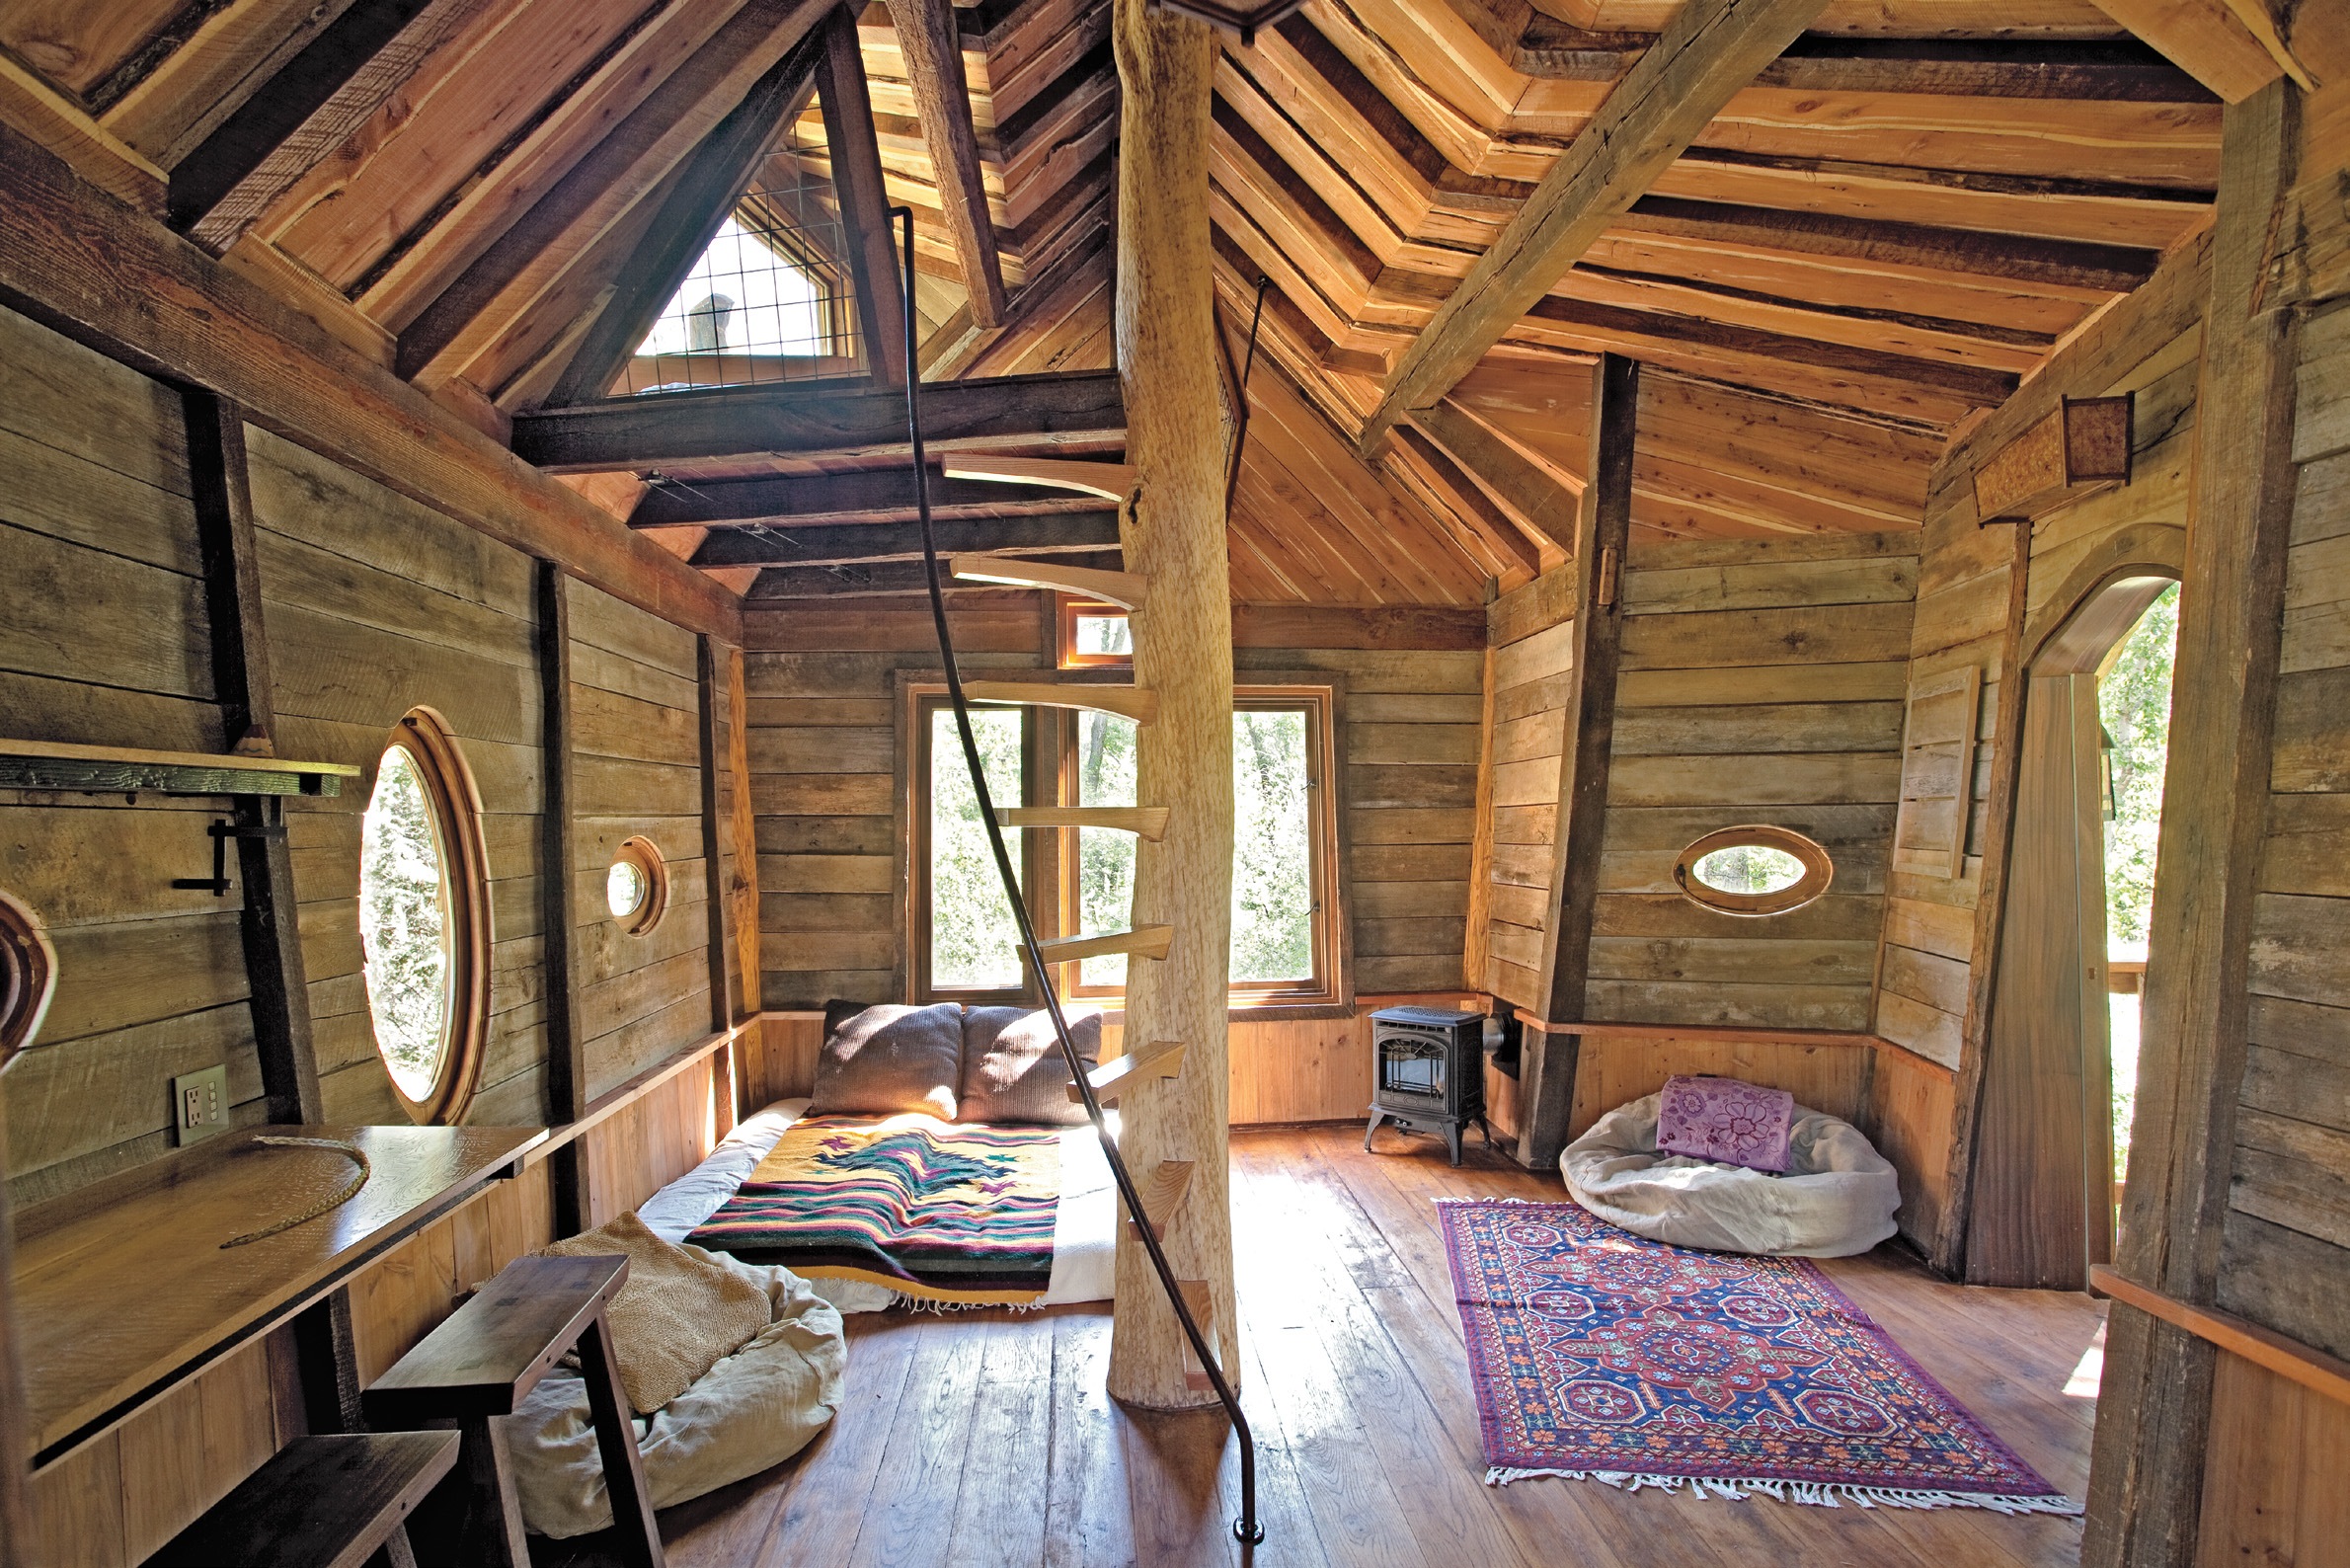 Tiny Homes By Lloyd Kahn Exclusive Image Gallery Excerpt